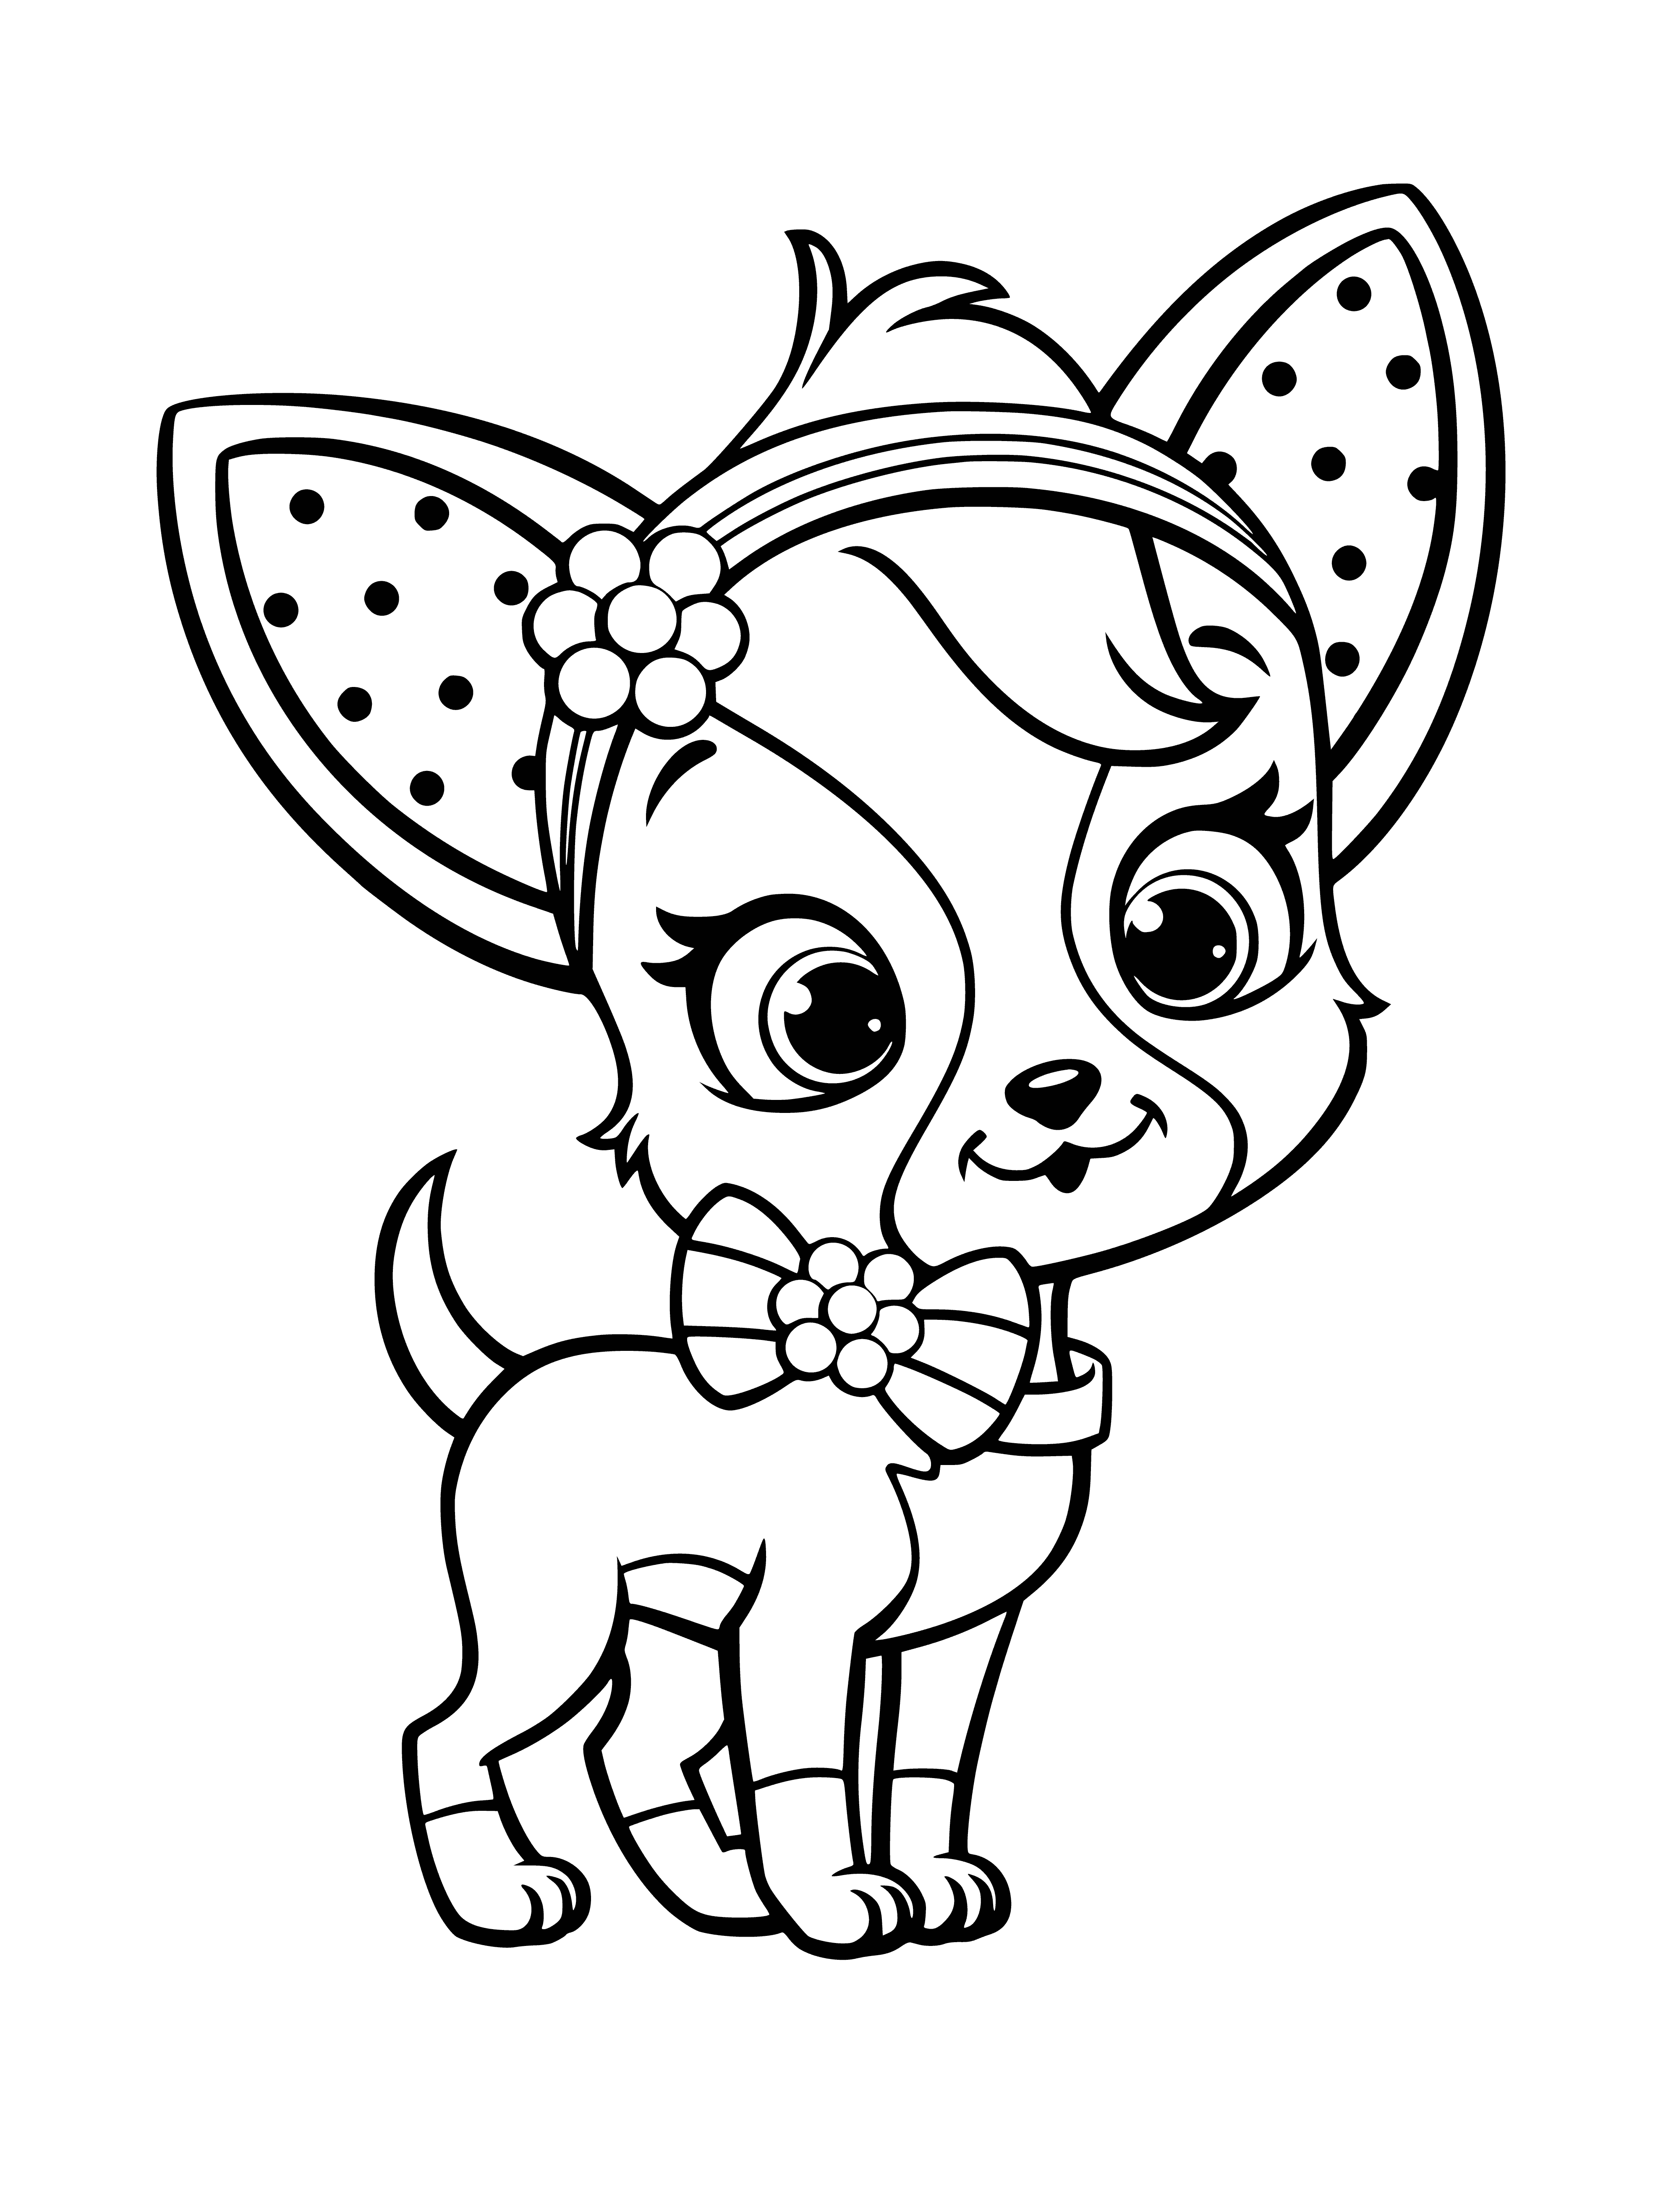 Close-up coloring page of short-furred Chihuahua with big eyes, perked ears, and black collar. #coloringpage #dog